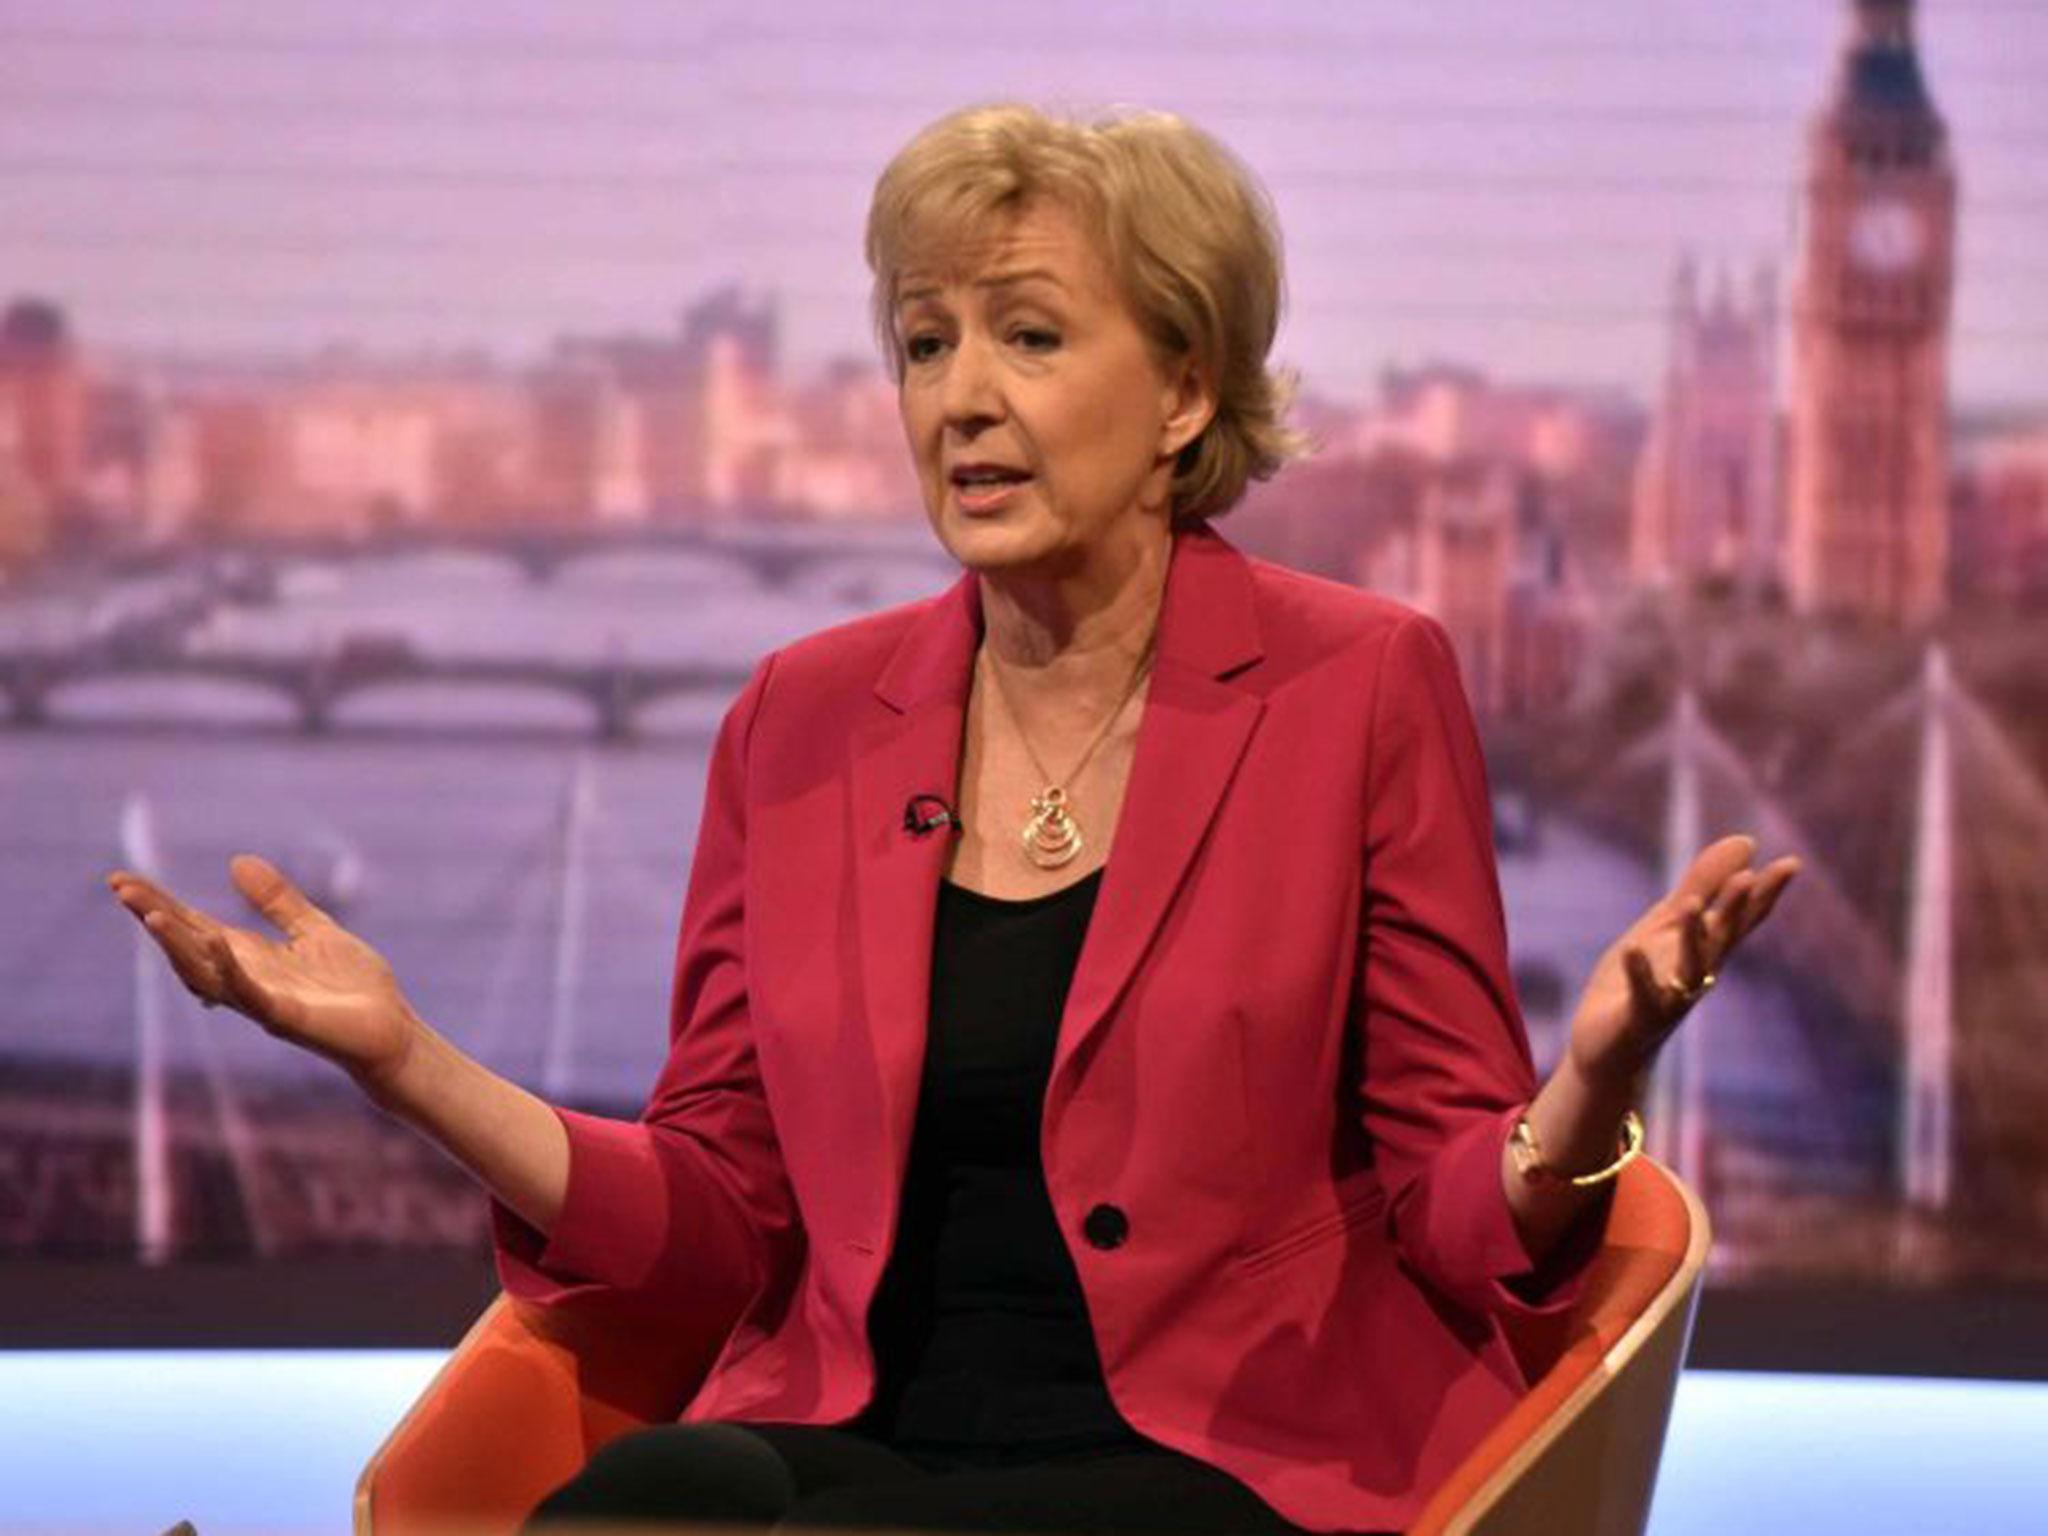 Andrea Leadsom has been criticised for her comments in an interview with The Times